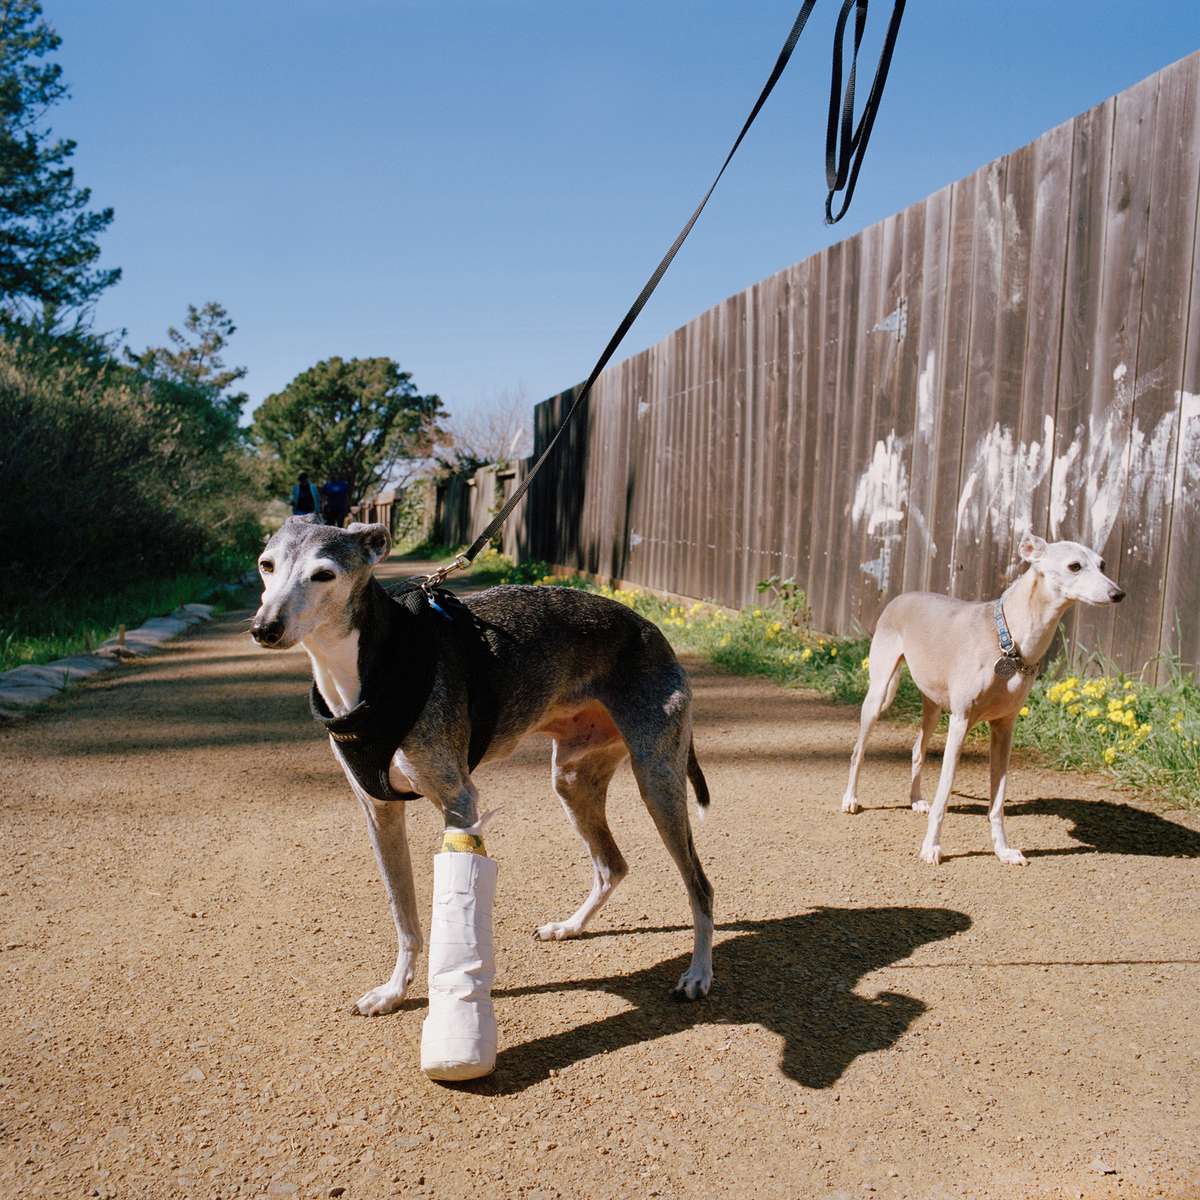 Images from the series 'Pacifica,' a personal exploration of a small town south of San Francisco. 